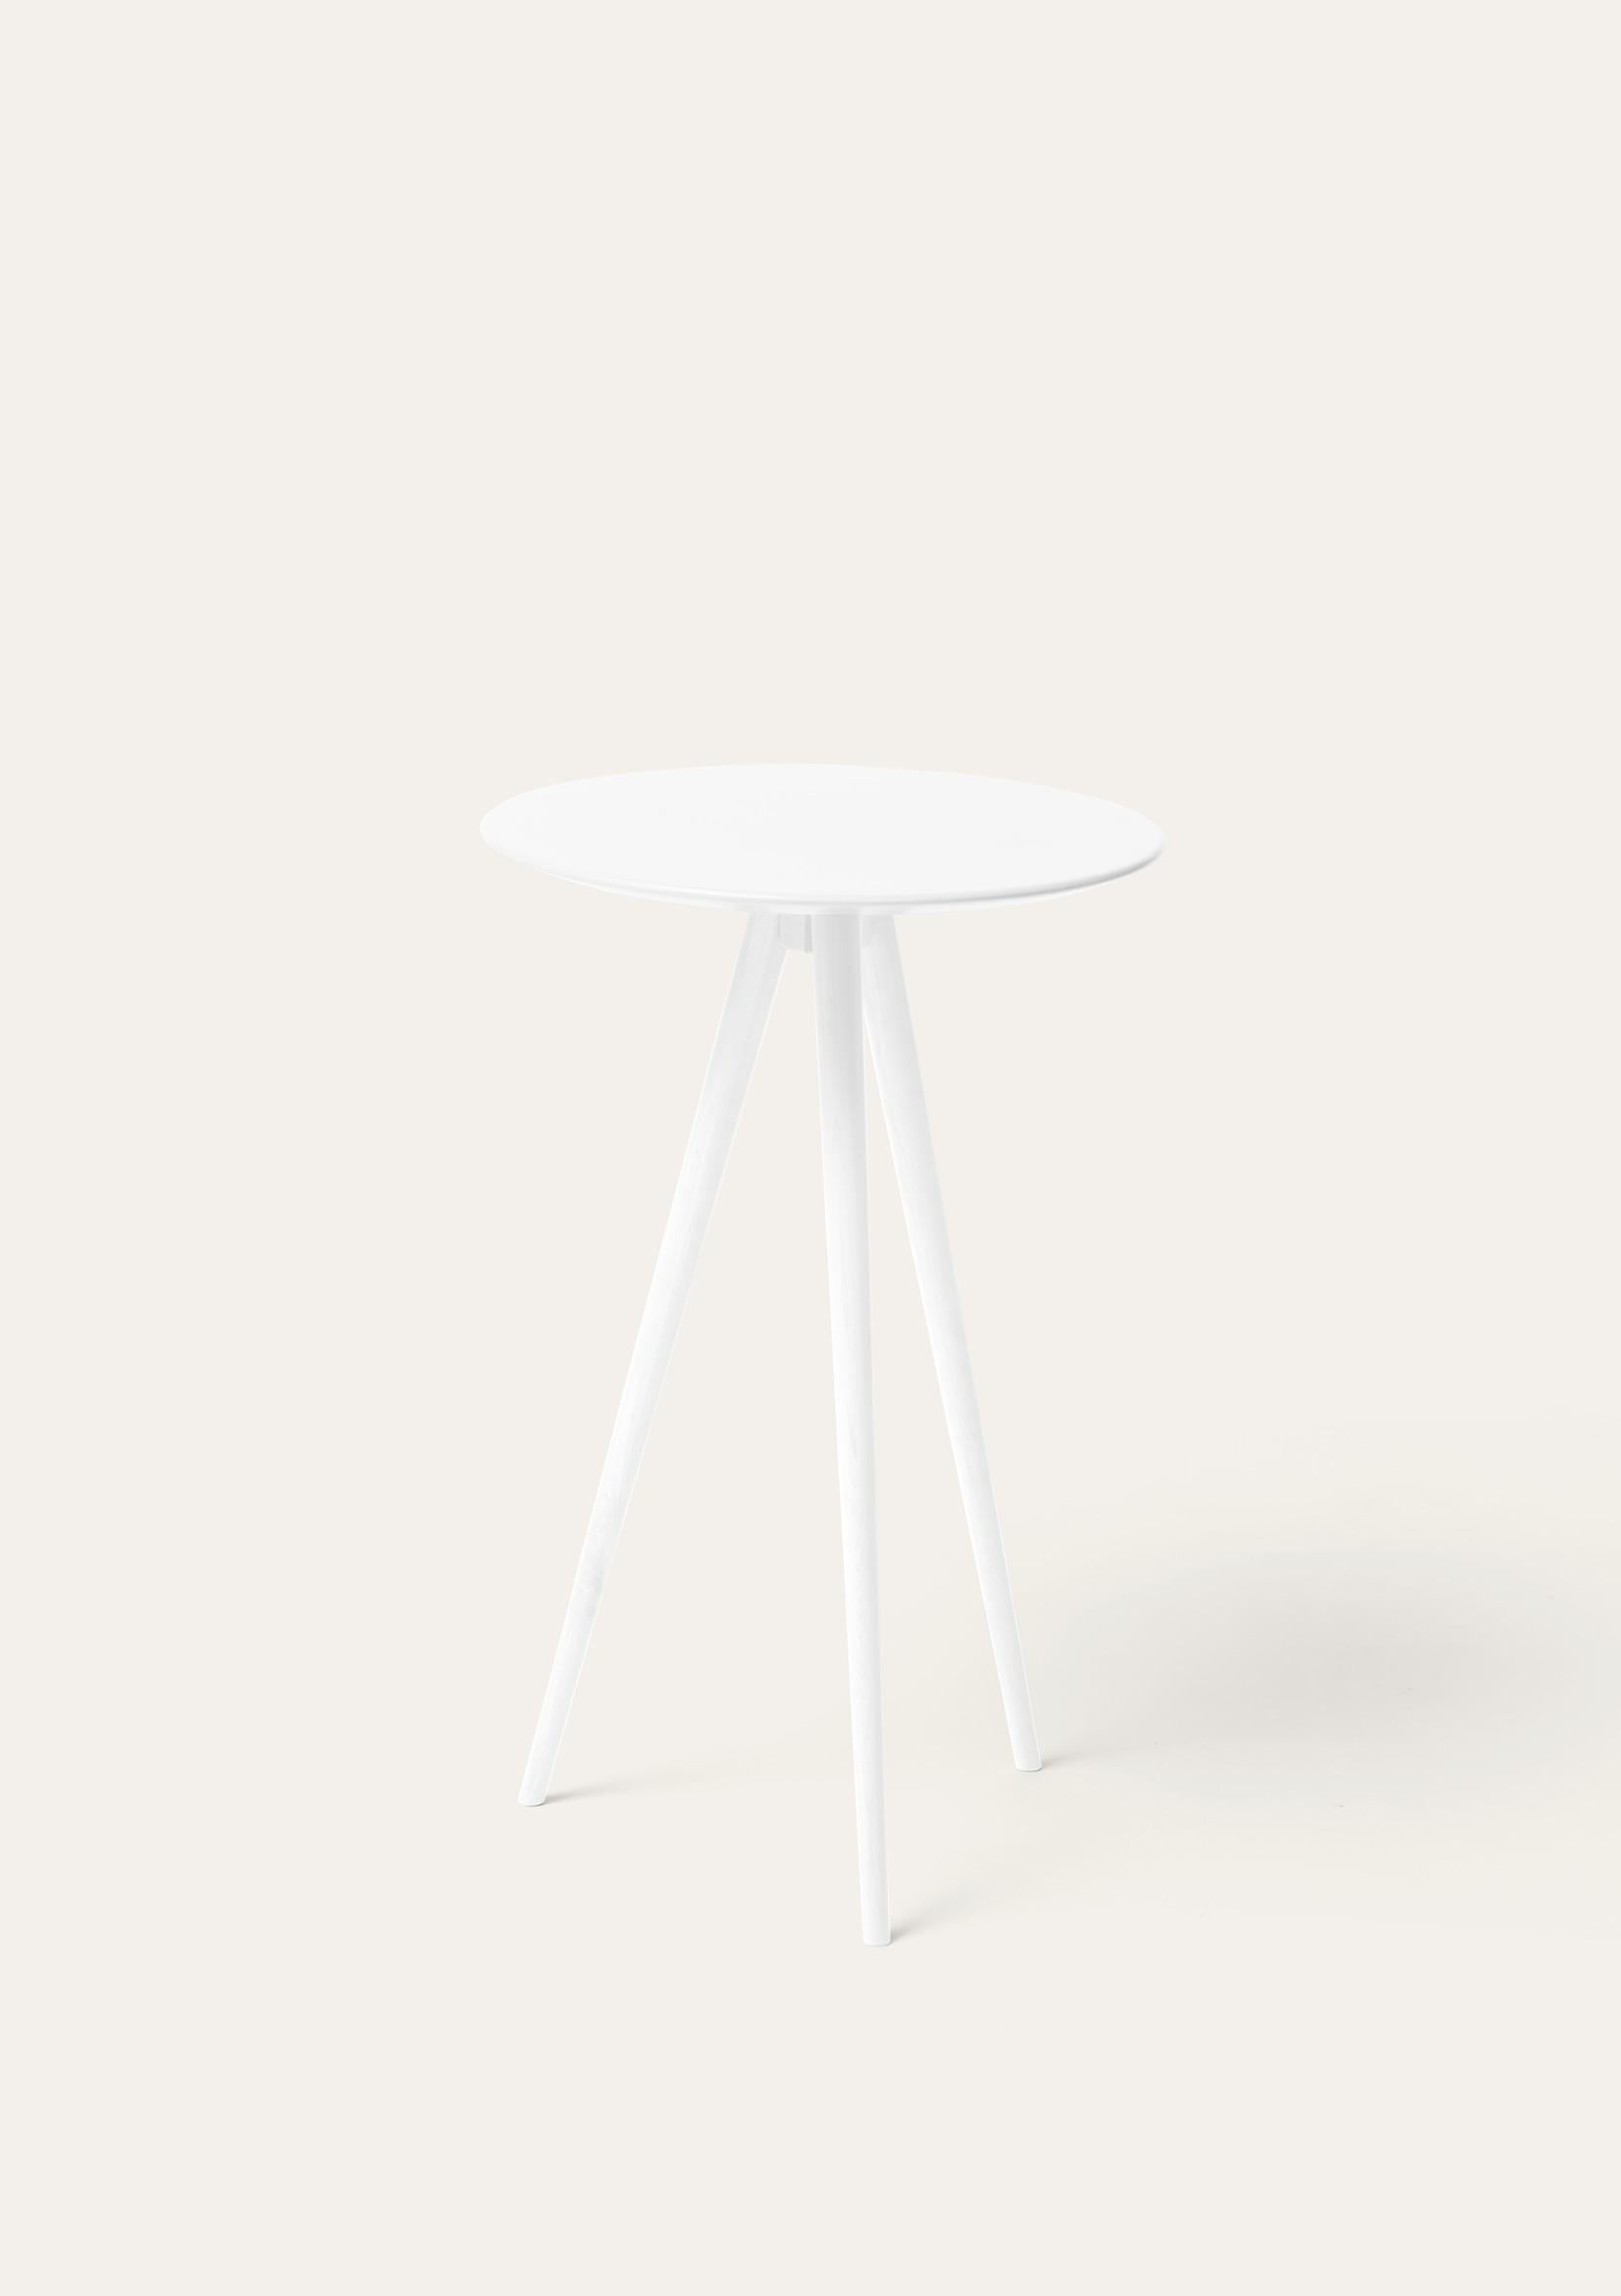 White Trip side table by Storängen Design
Dimensions: D 35 x H 62 cm
Materials: birch wood.
Also available in other colors.

Trip is our smallest table, a lightweight three-legged surface entirely made of birch. A decorative item that can be